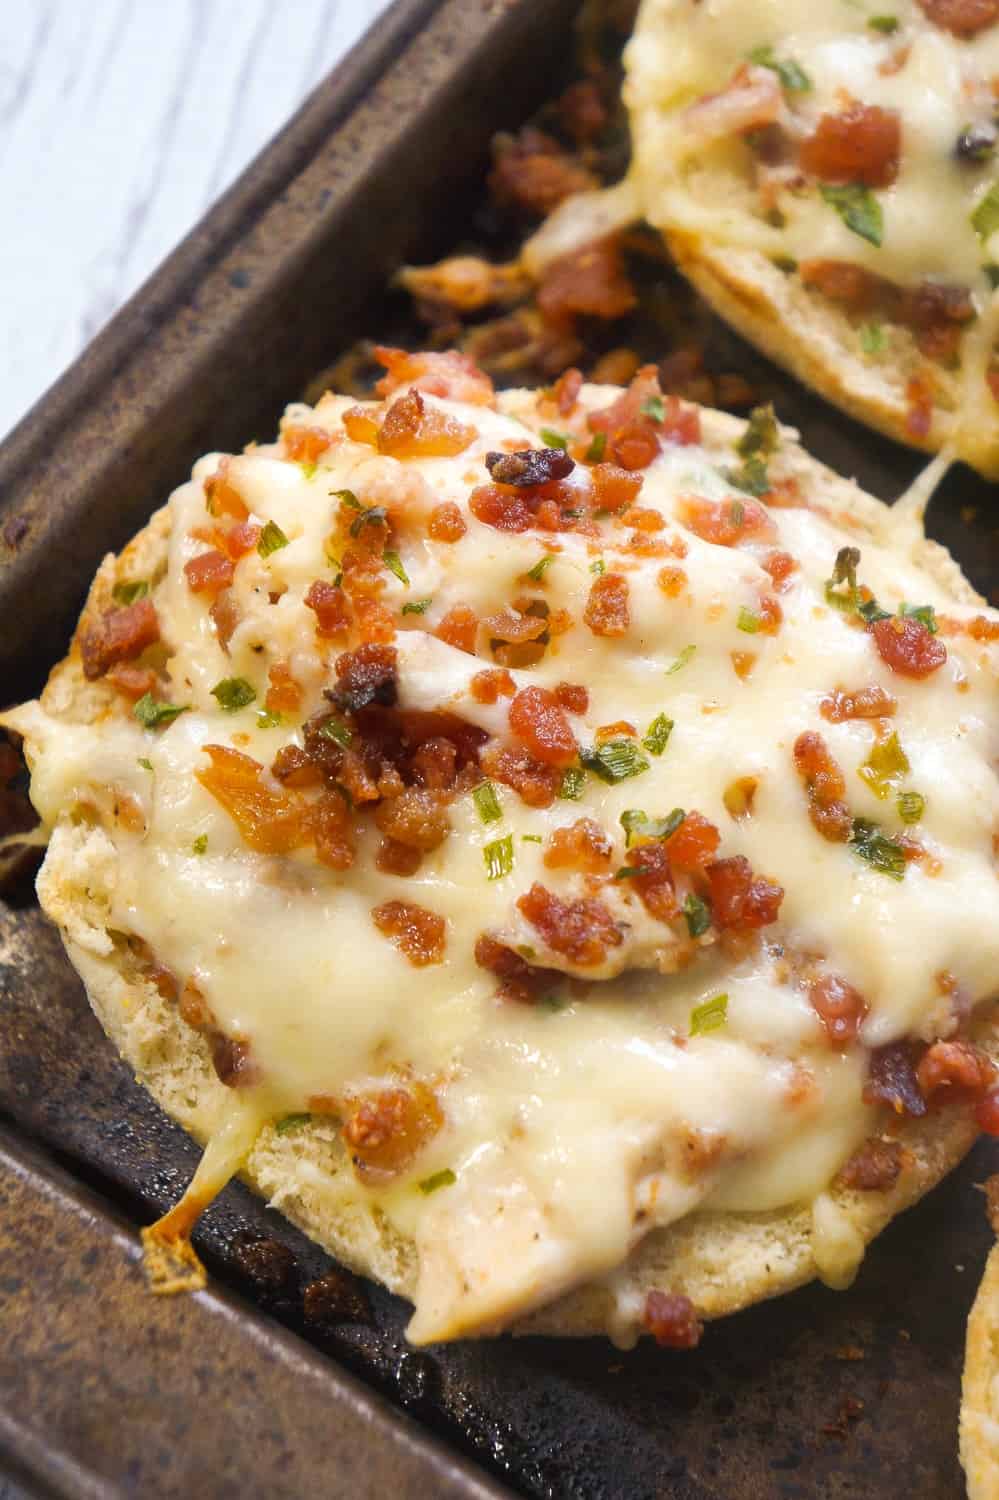 Bacon Chicken Alfredo English muffins are an easy dinner recipe or perfect party snack. These baked English muffins are loaded with shredded rotisserie chicken, bacon, cheese and Alfredo sauce.